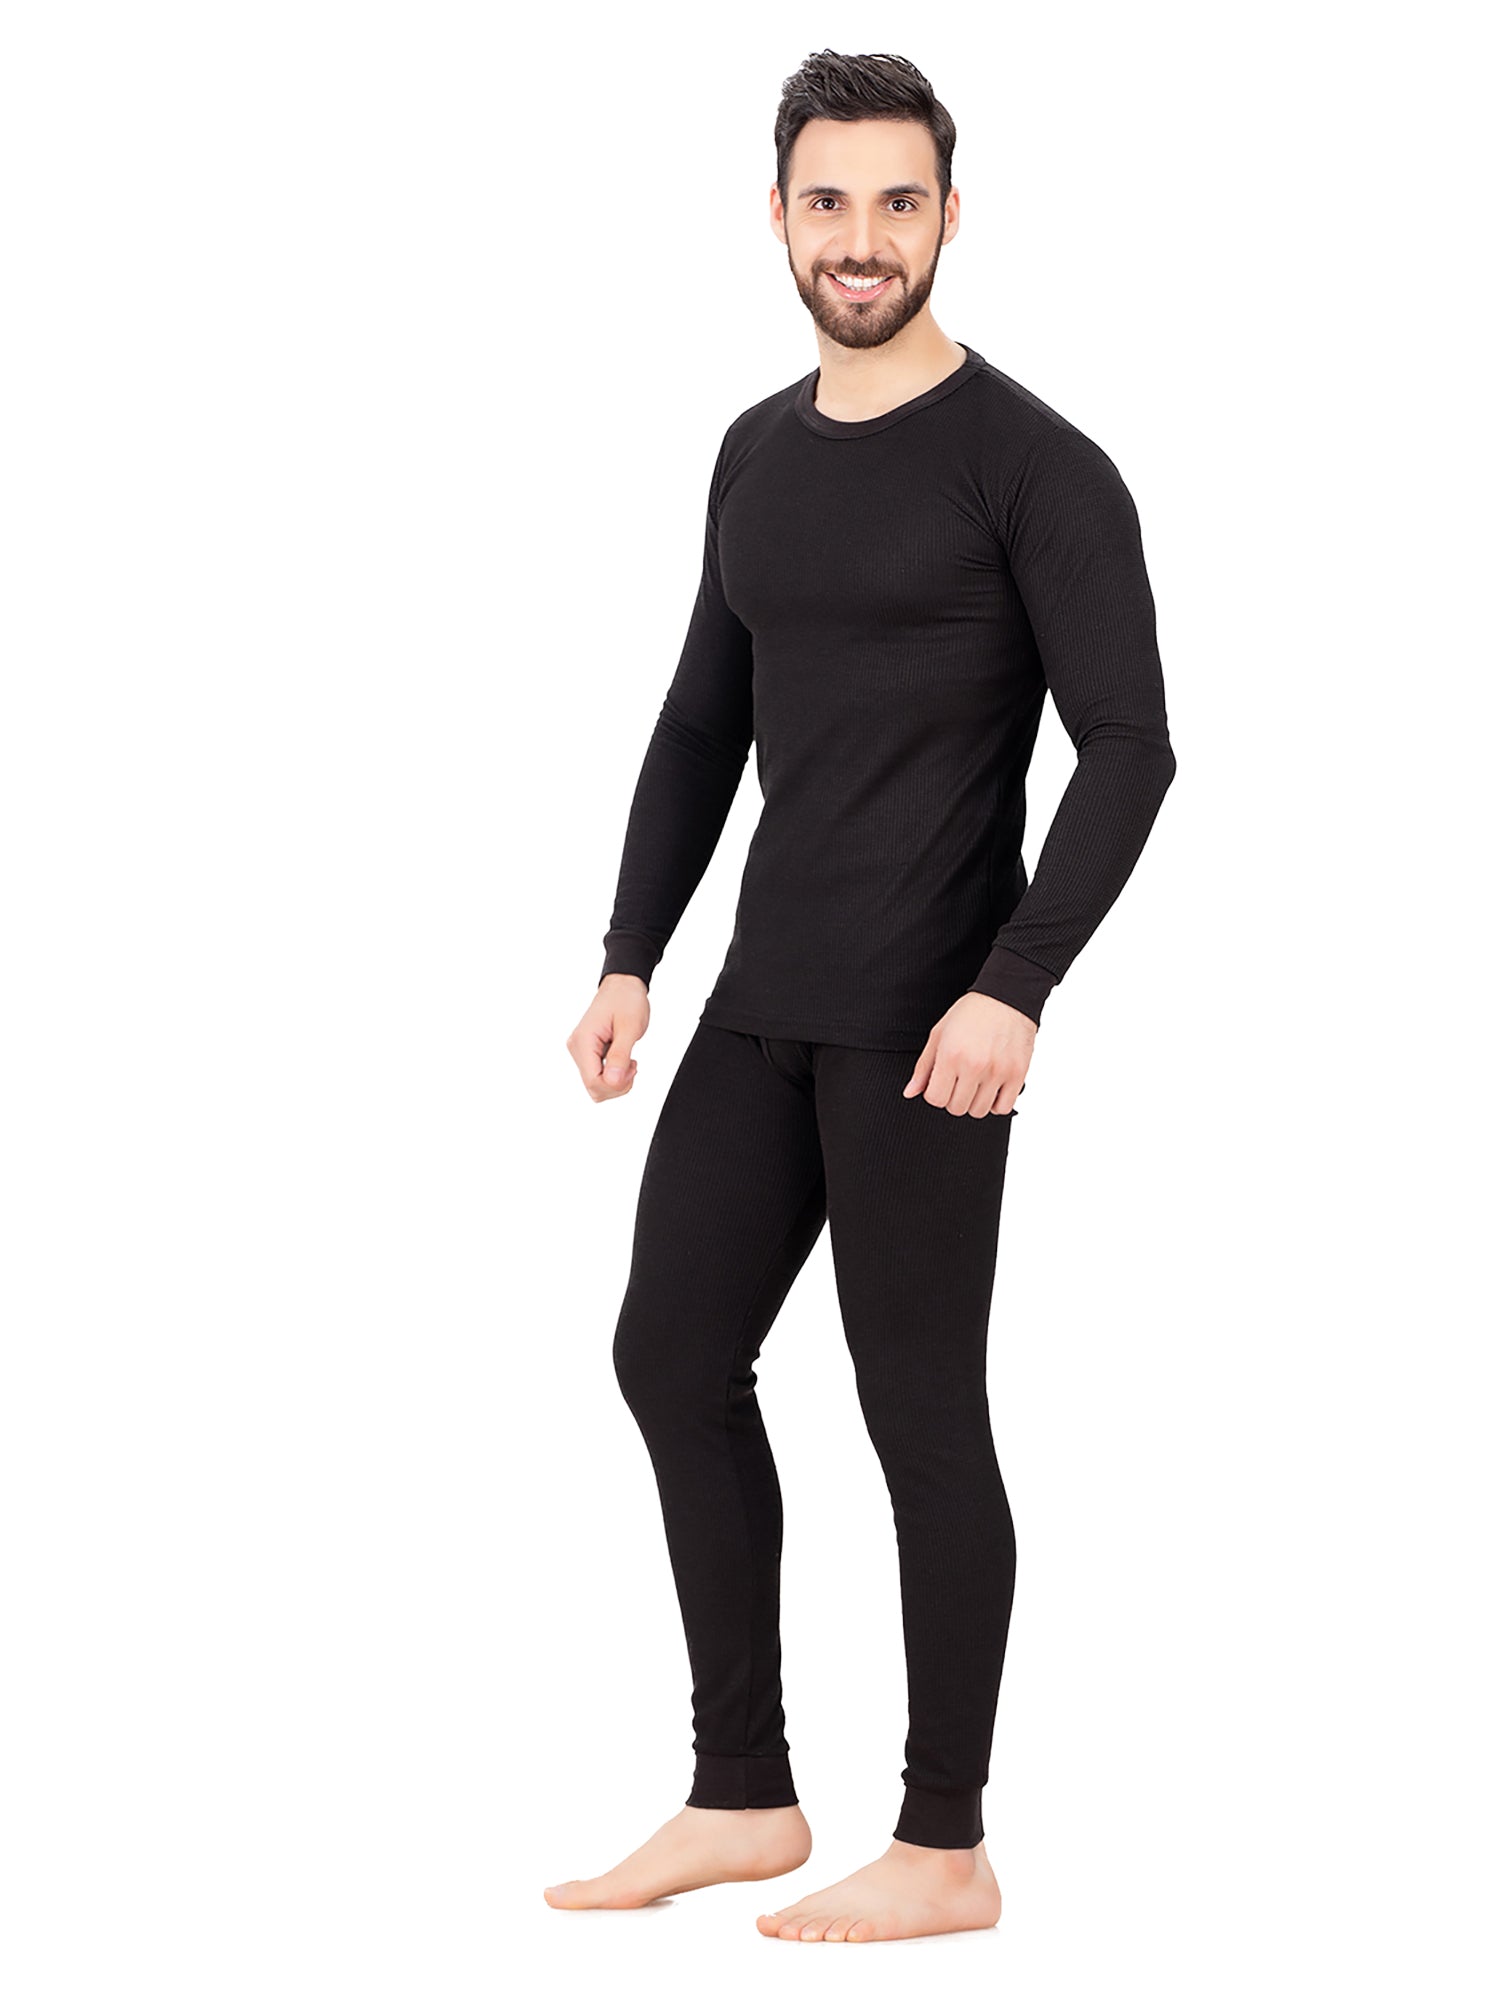 Can You Wear Long Johns in Public?– Thermajohn